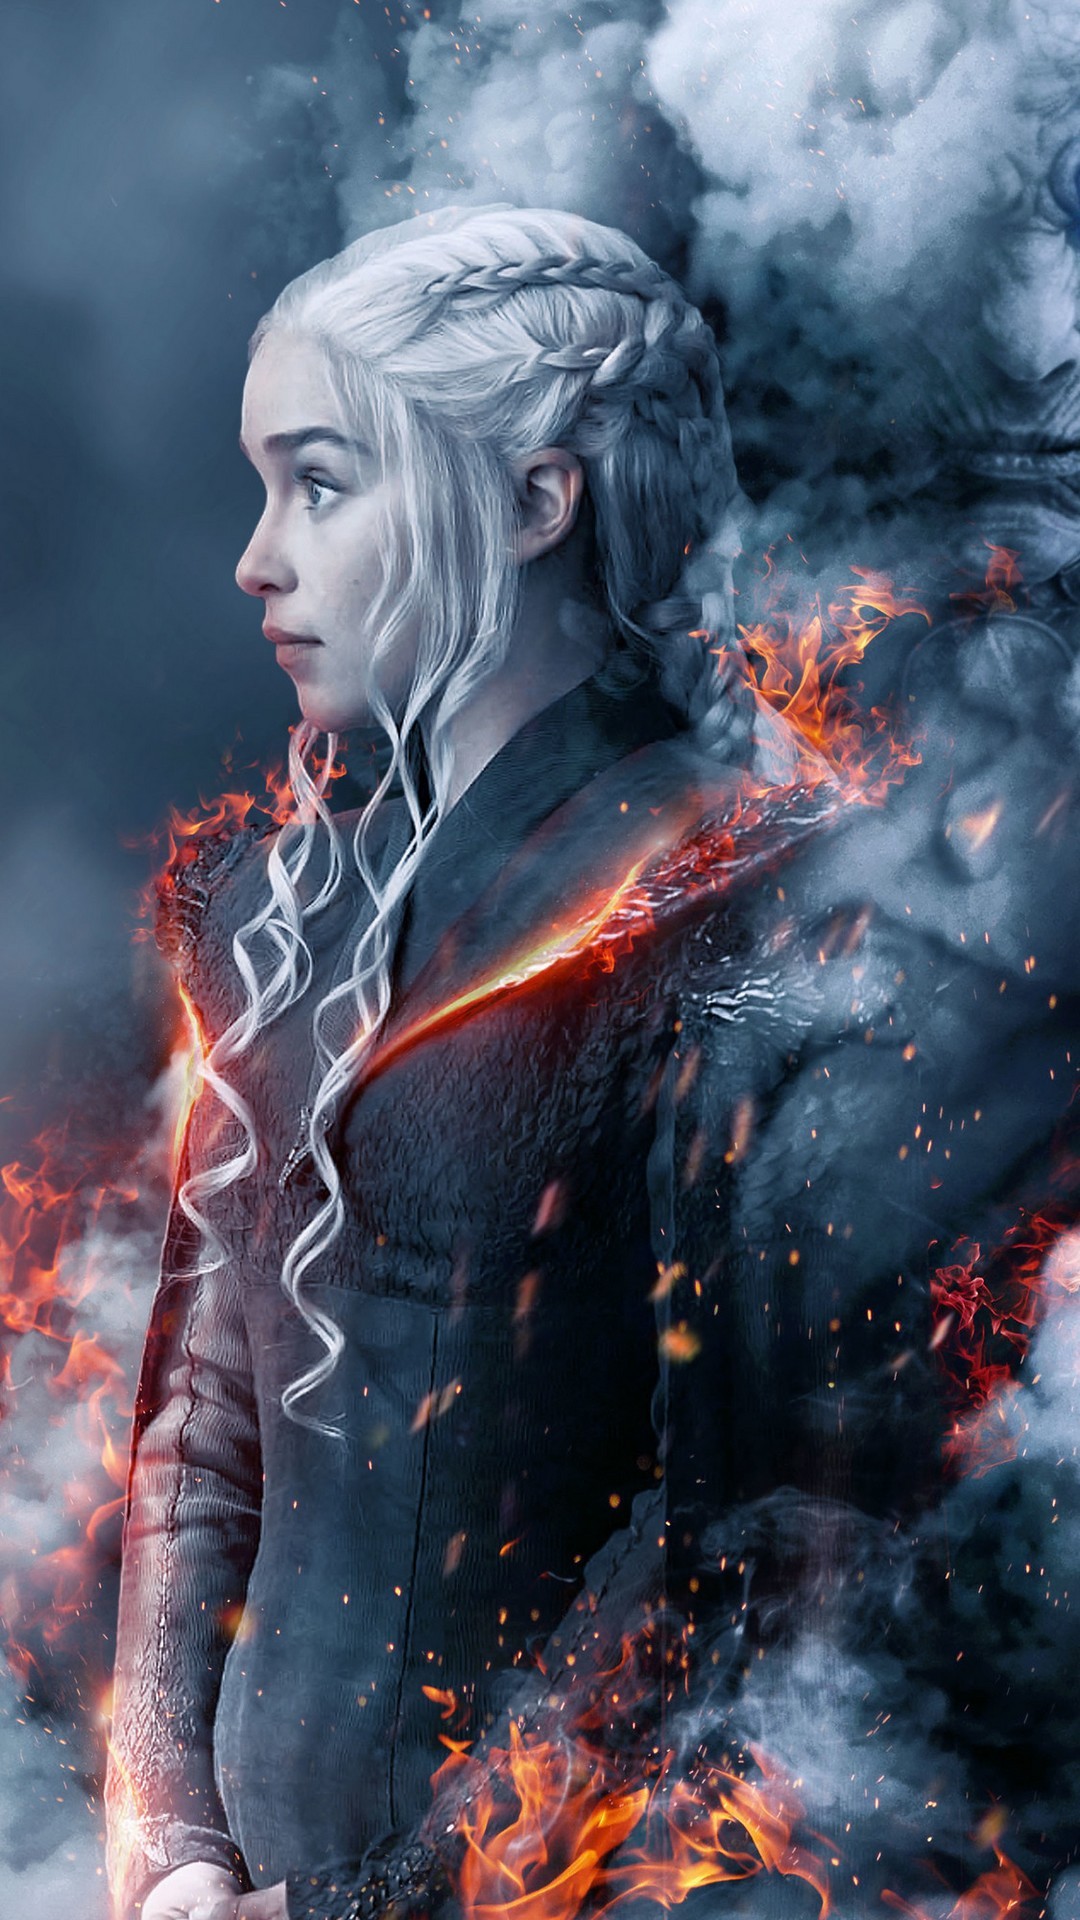 game of thrones mobile wallpaper,cg artwork,fictional character,geological phenomenon,illustration,darkness